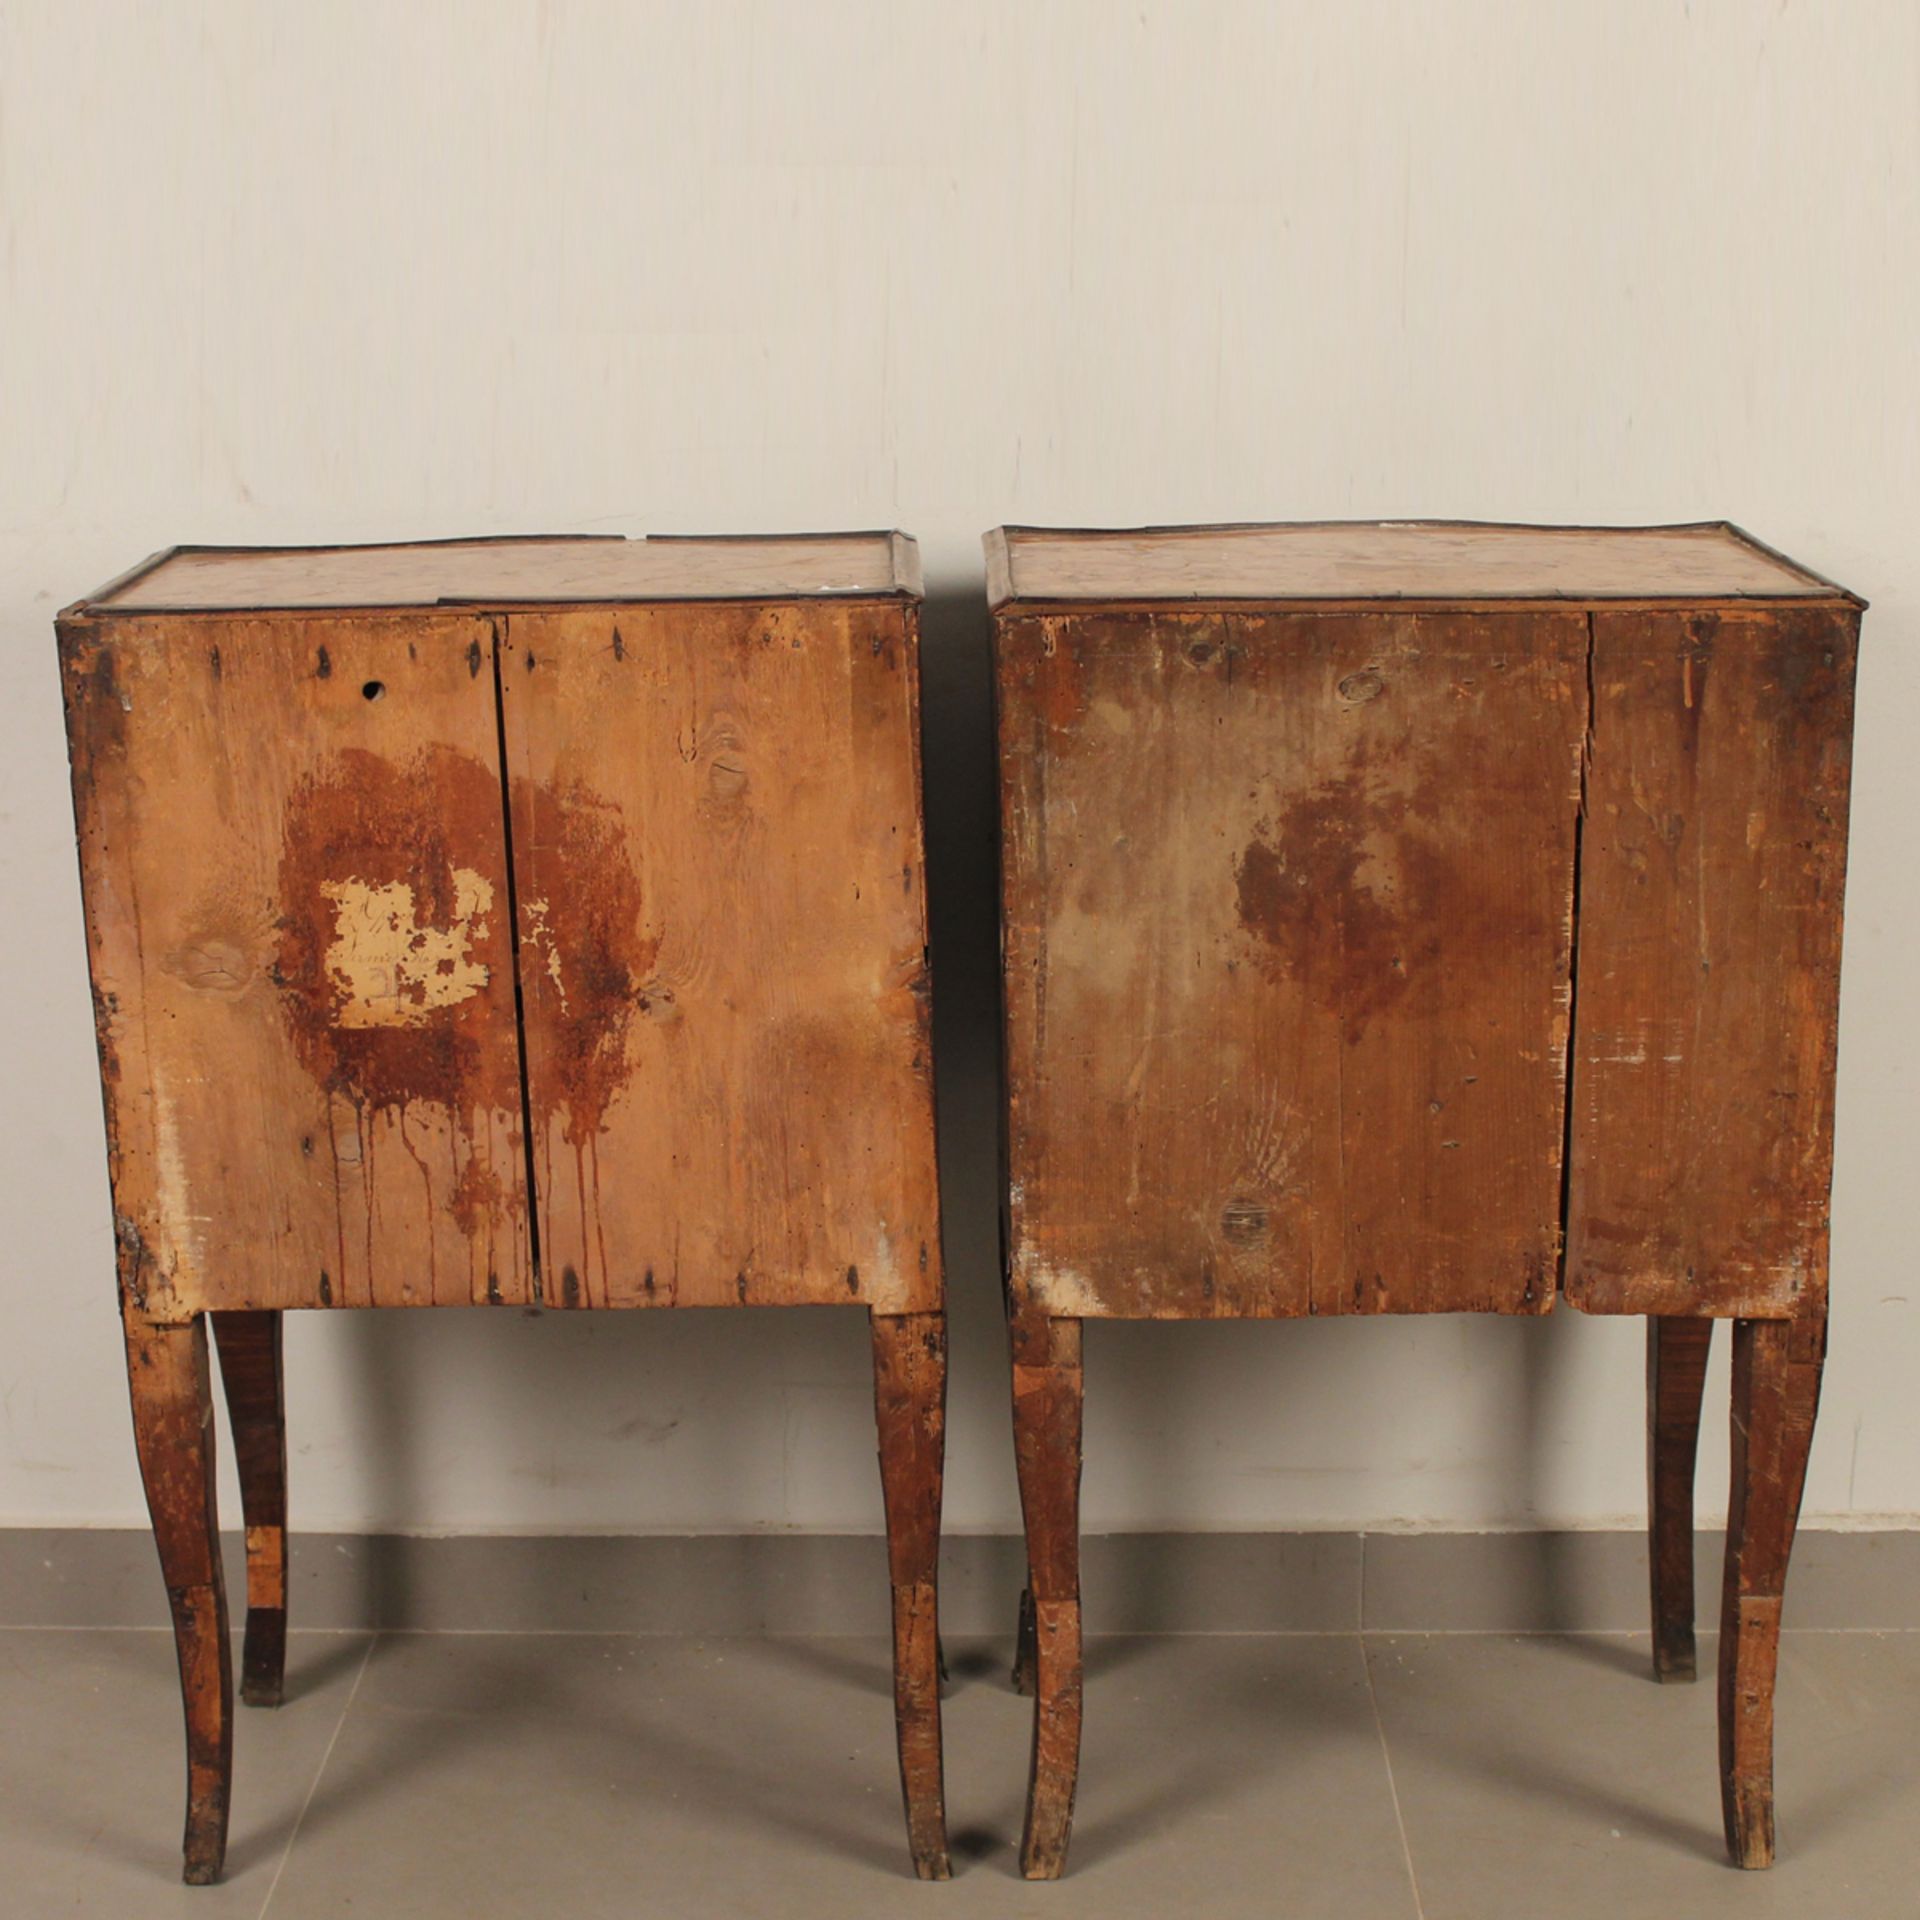 Coppia di comodini - Pair of bedside tables - Image 2 of 2